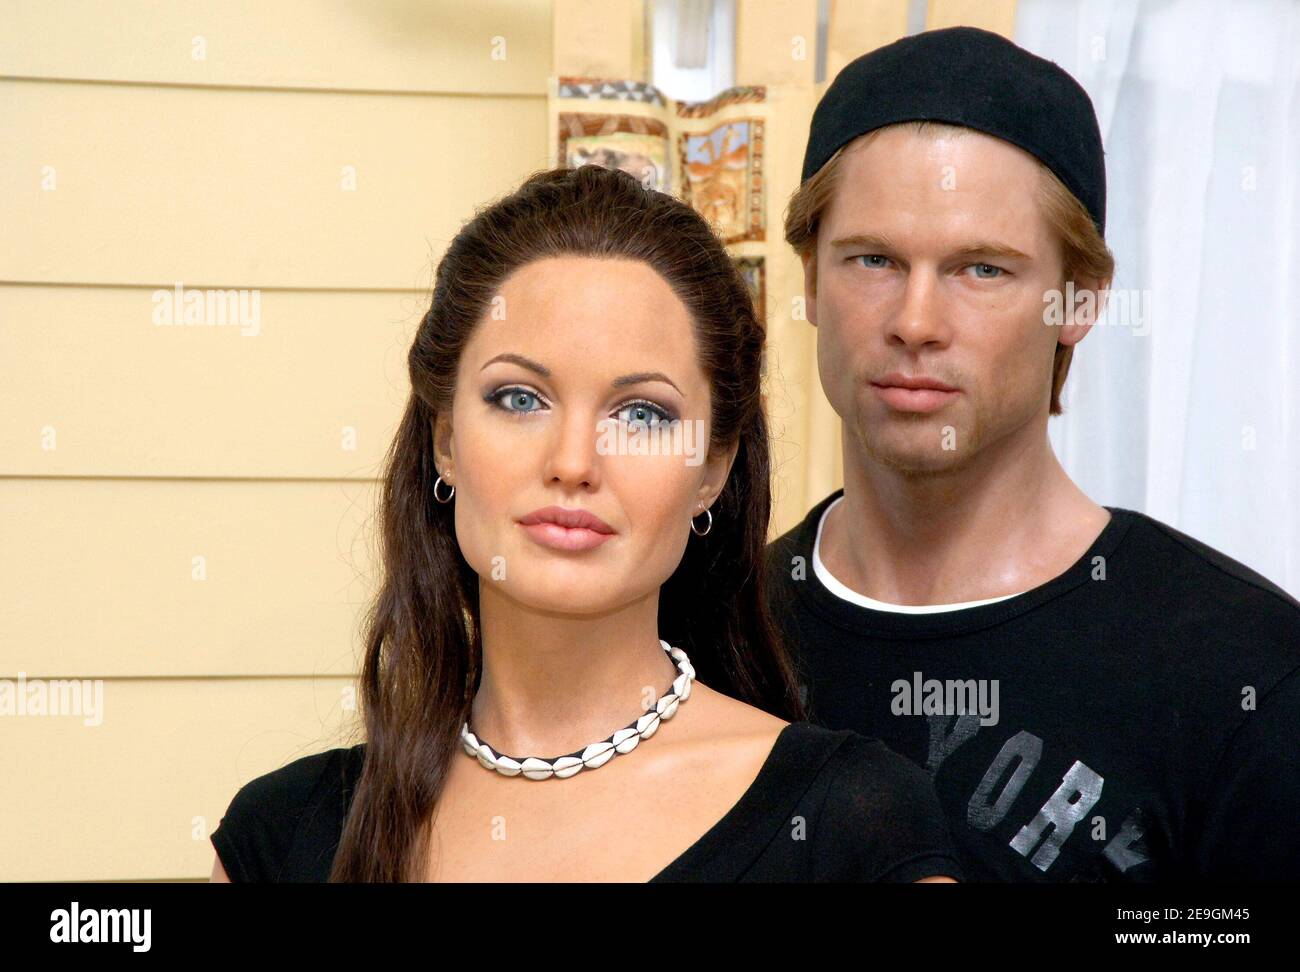 The Shiloh Nouvel Jolie Pitt wax figure is held by Madame Tussauds General Manager Janine DiGioacchino during its debut at Madame Tussauds on Wednesday, July 26, 2006 in New York City, New York. Photo by Gregorio Binuya/ABACAPRESS.COM Stock Photo